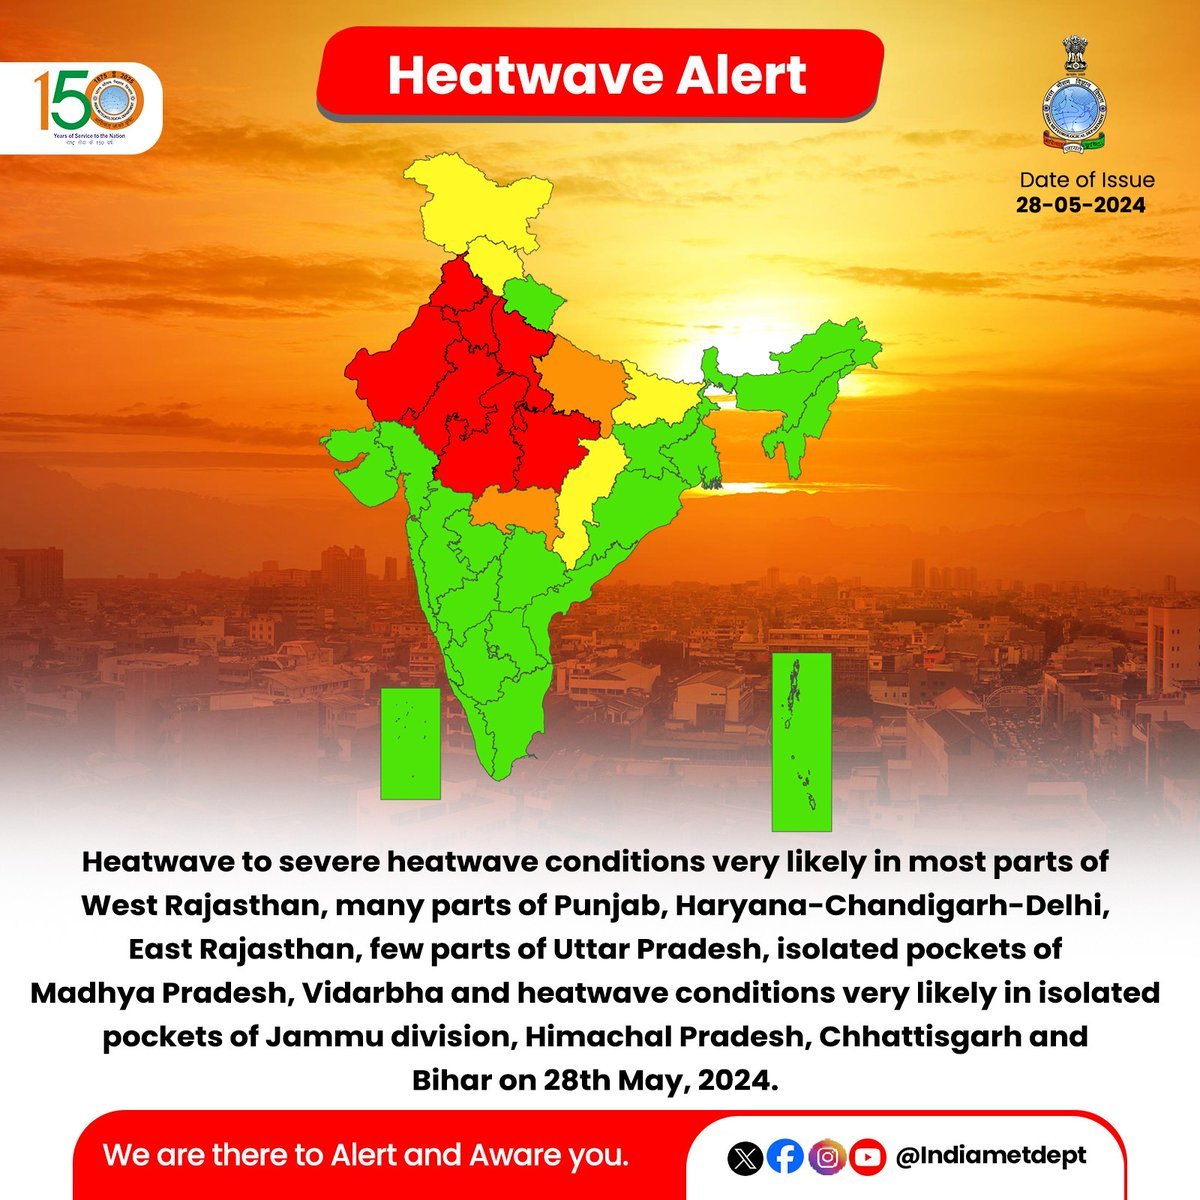 #WeatherUpdate | Heatwave to severe heatwave conditions very likely in most parts of West Rajasthan, many parts of #Punjab, Haryana-Chandigarh-Delhi, East Rajasthan, few parts of #UttarPradesh, isolated pockets of #MadhyaPradesh, Vidarbha and #heatwave conditions very likely in